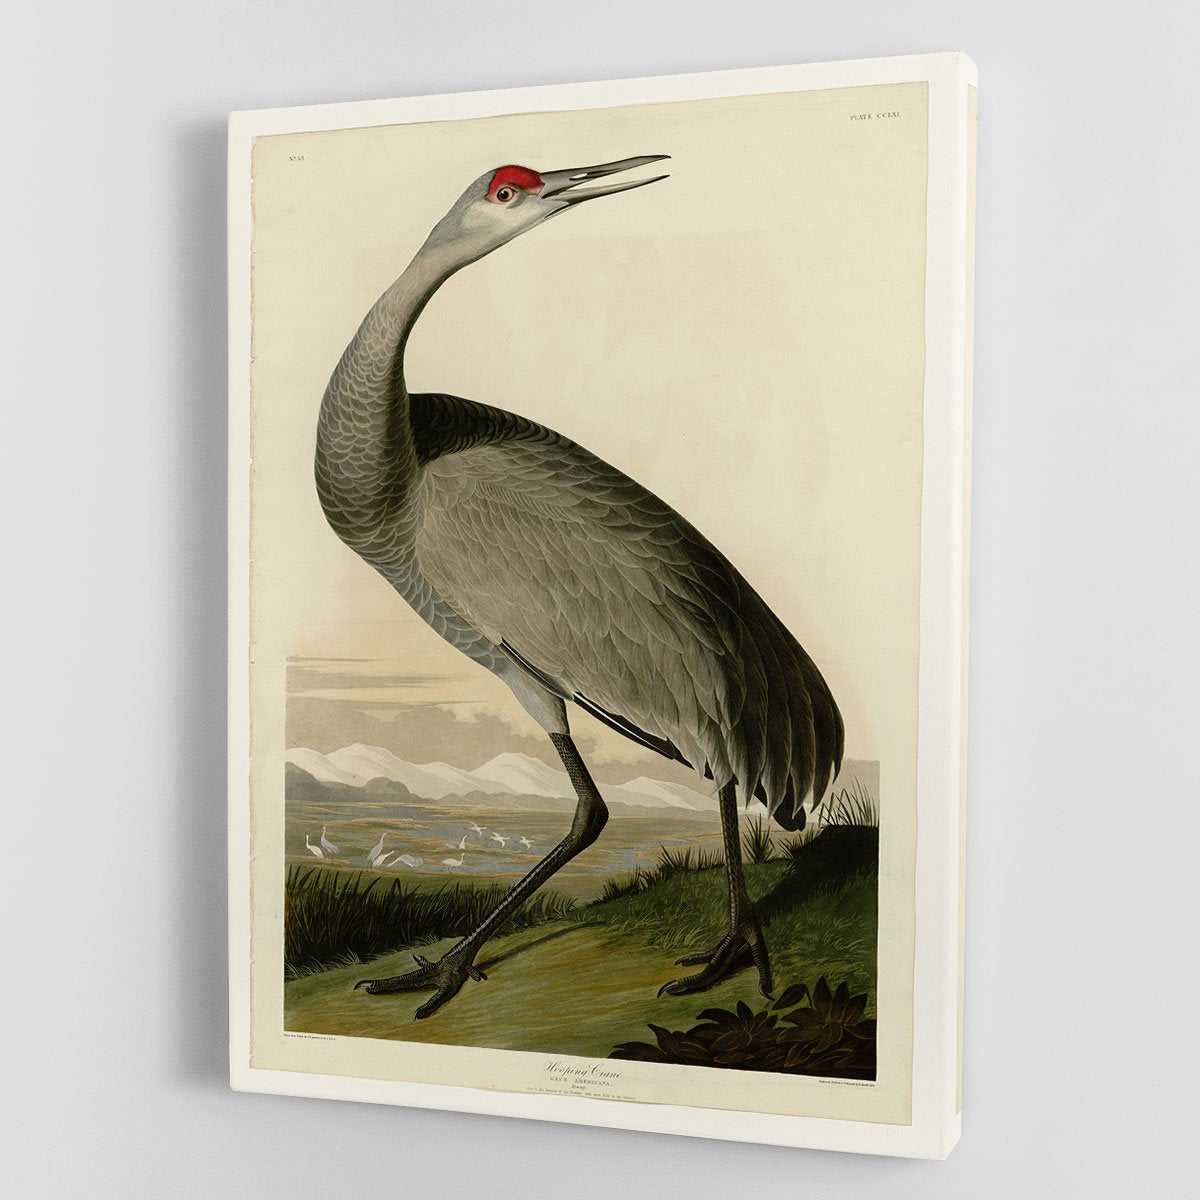 Whooping Crane by Audubon Canvas Print or Poster